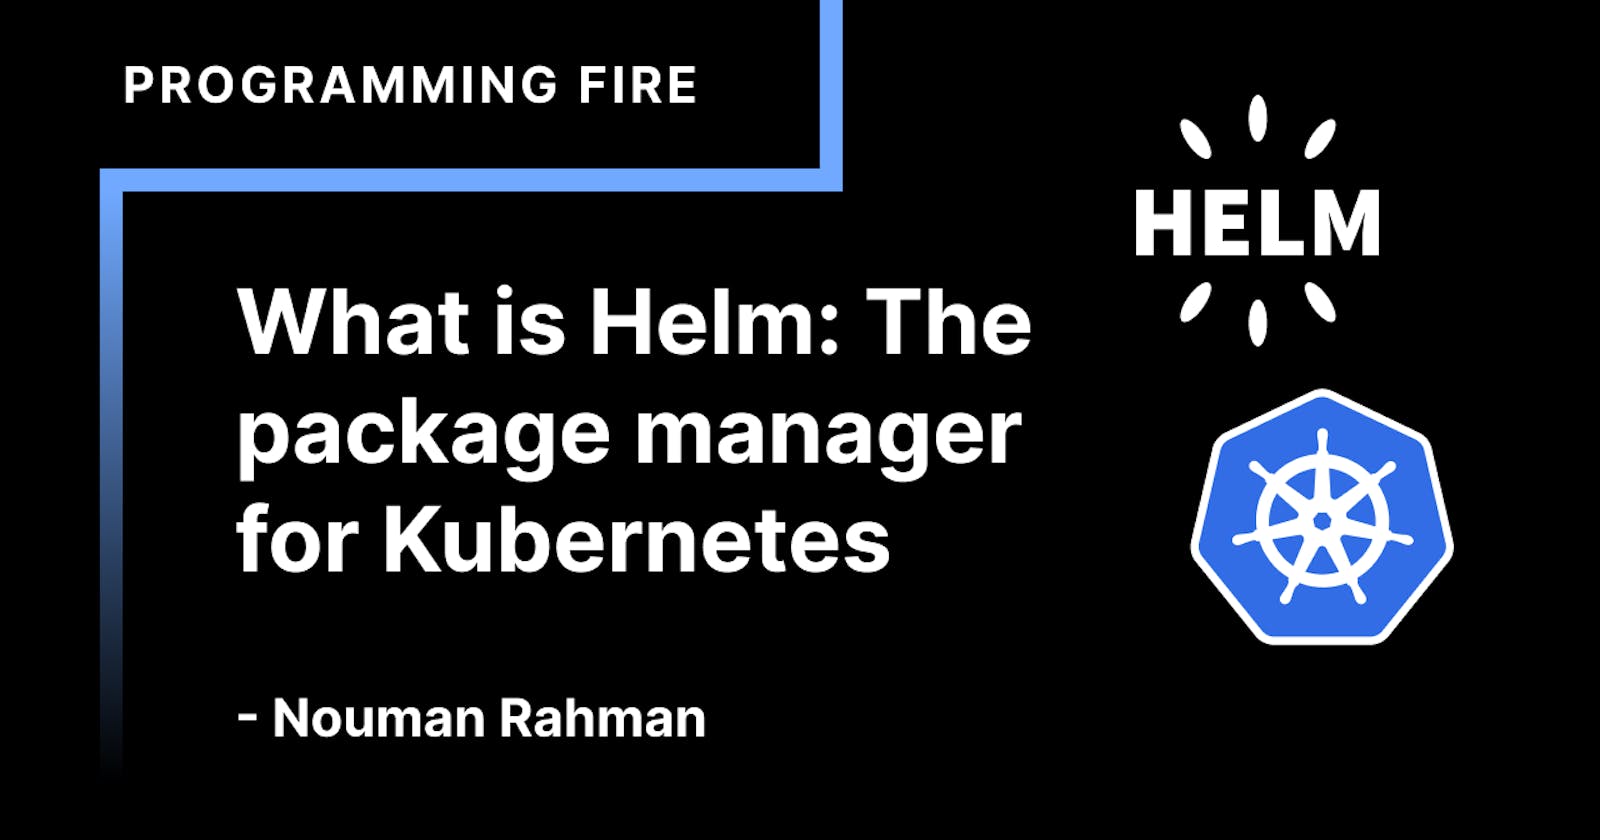 What is Helm: The package manager for Kubernetes